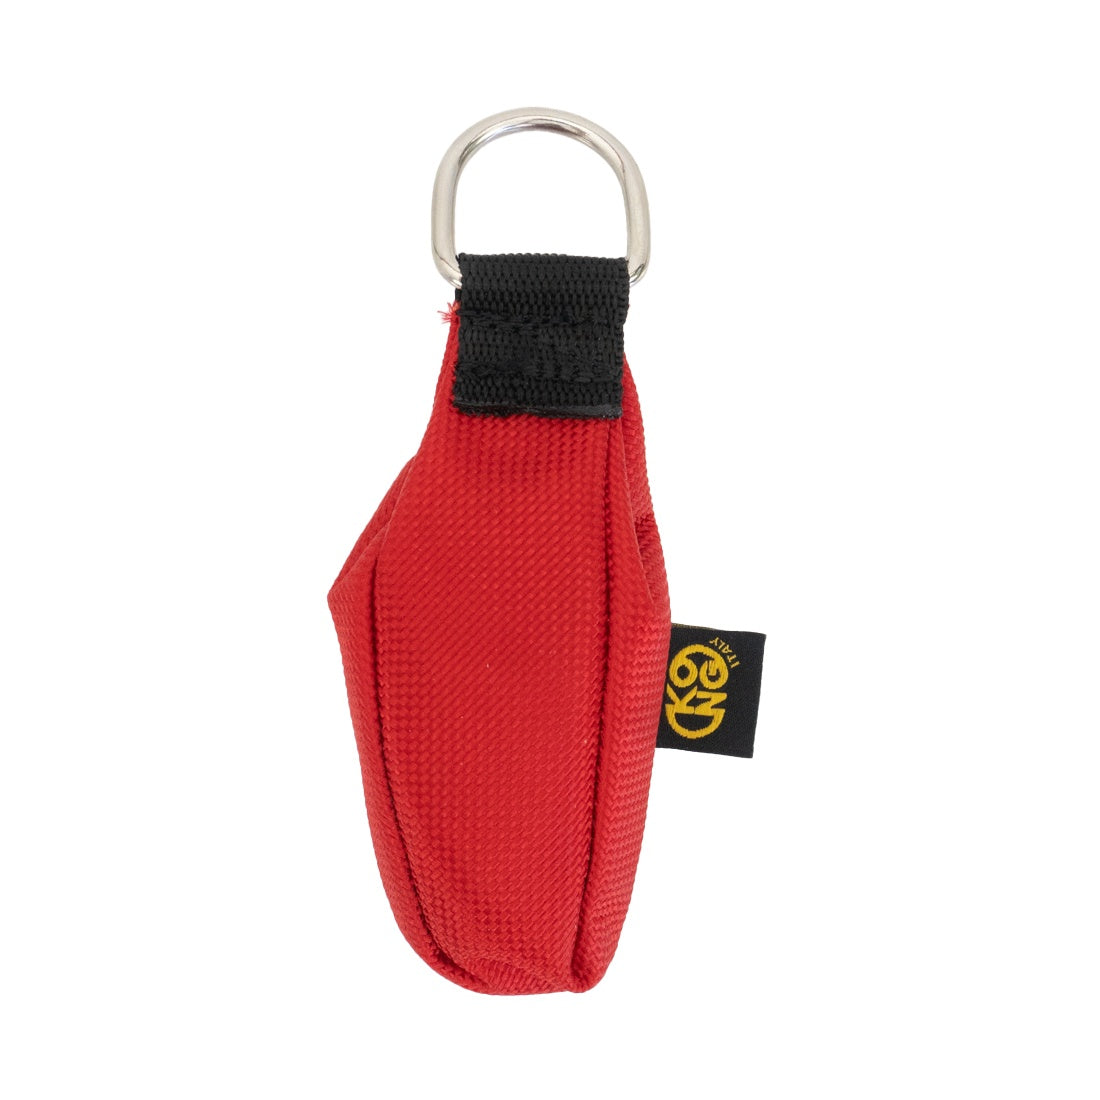 KONG Throwing Bag Red 350 Gram Front View